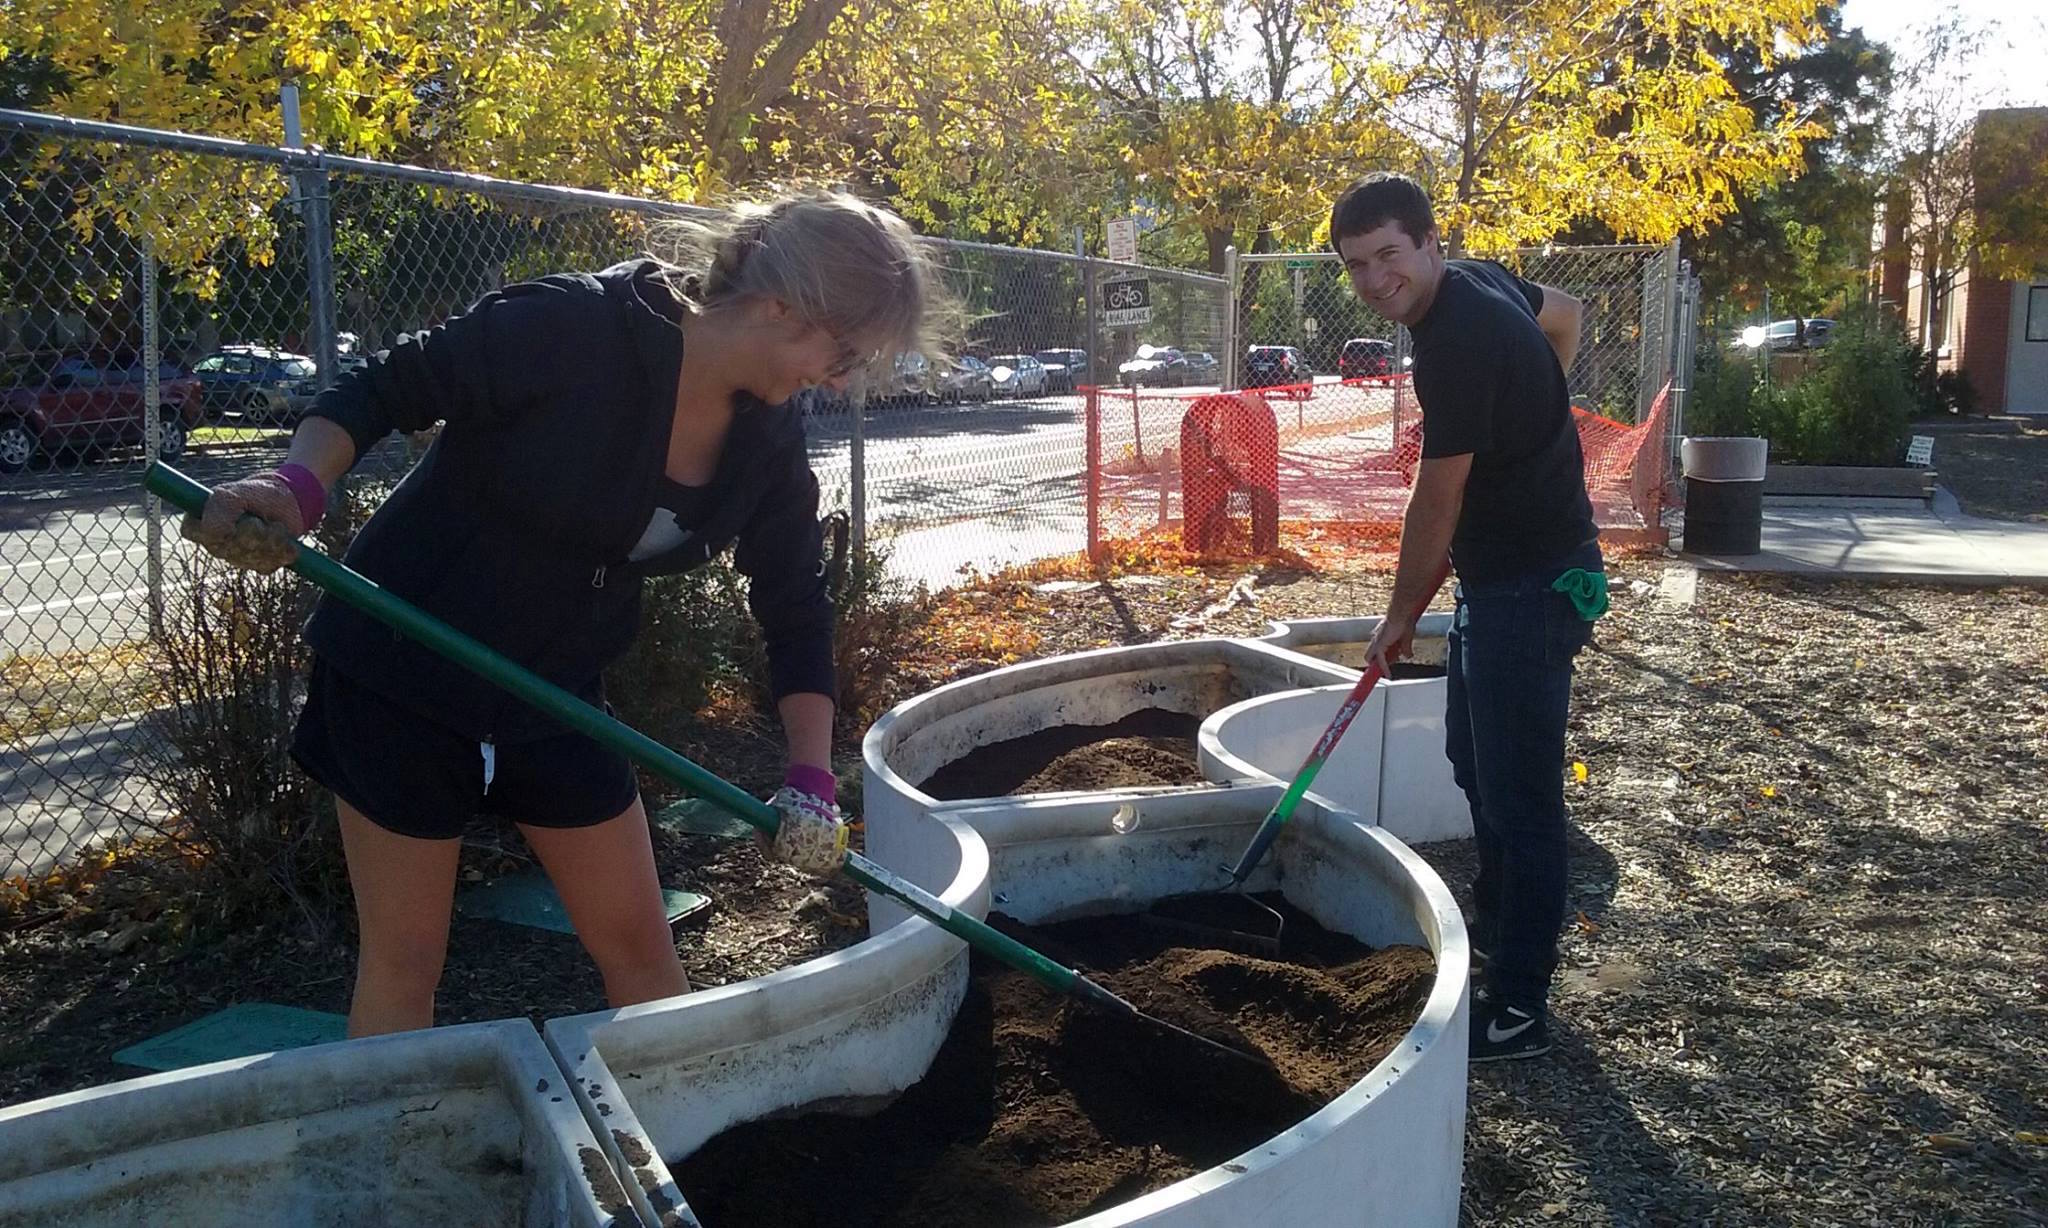 Two people using shovels to dig dirt in planters